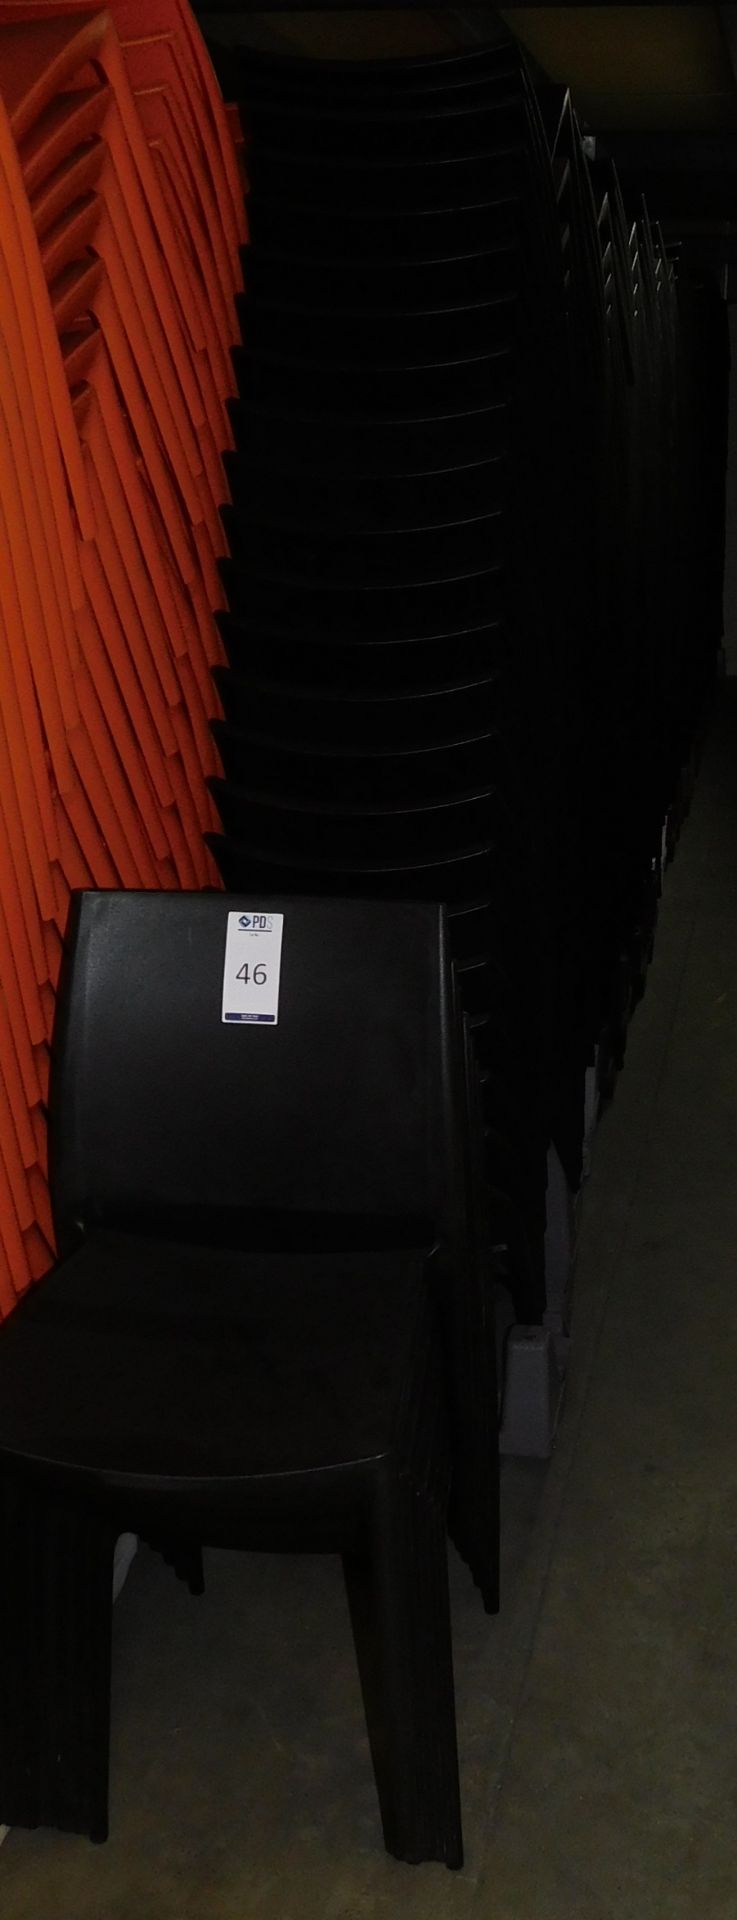 260 Stax Chairs, Black (Located Huntingdon, See General Notes for More Details) - Image 4 of 4